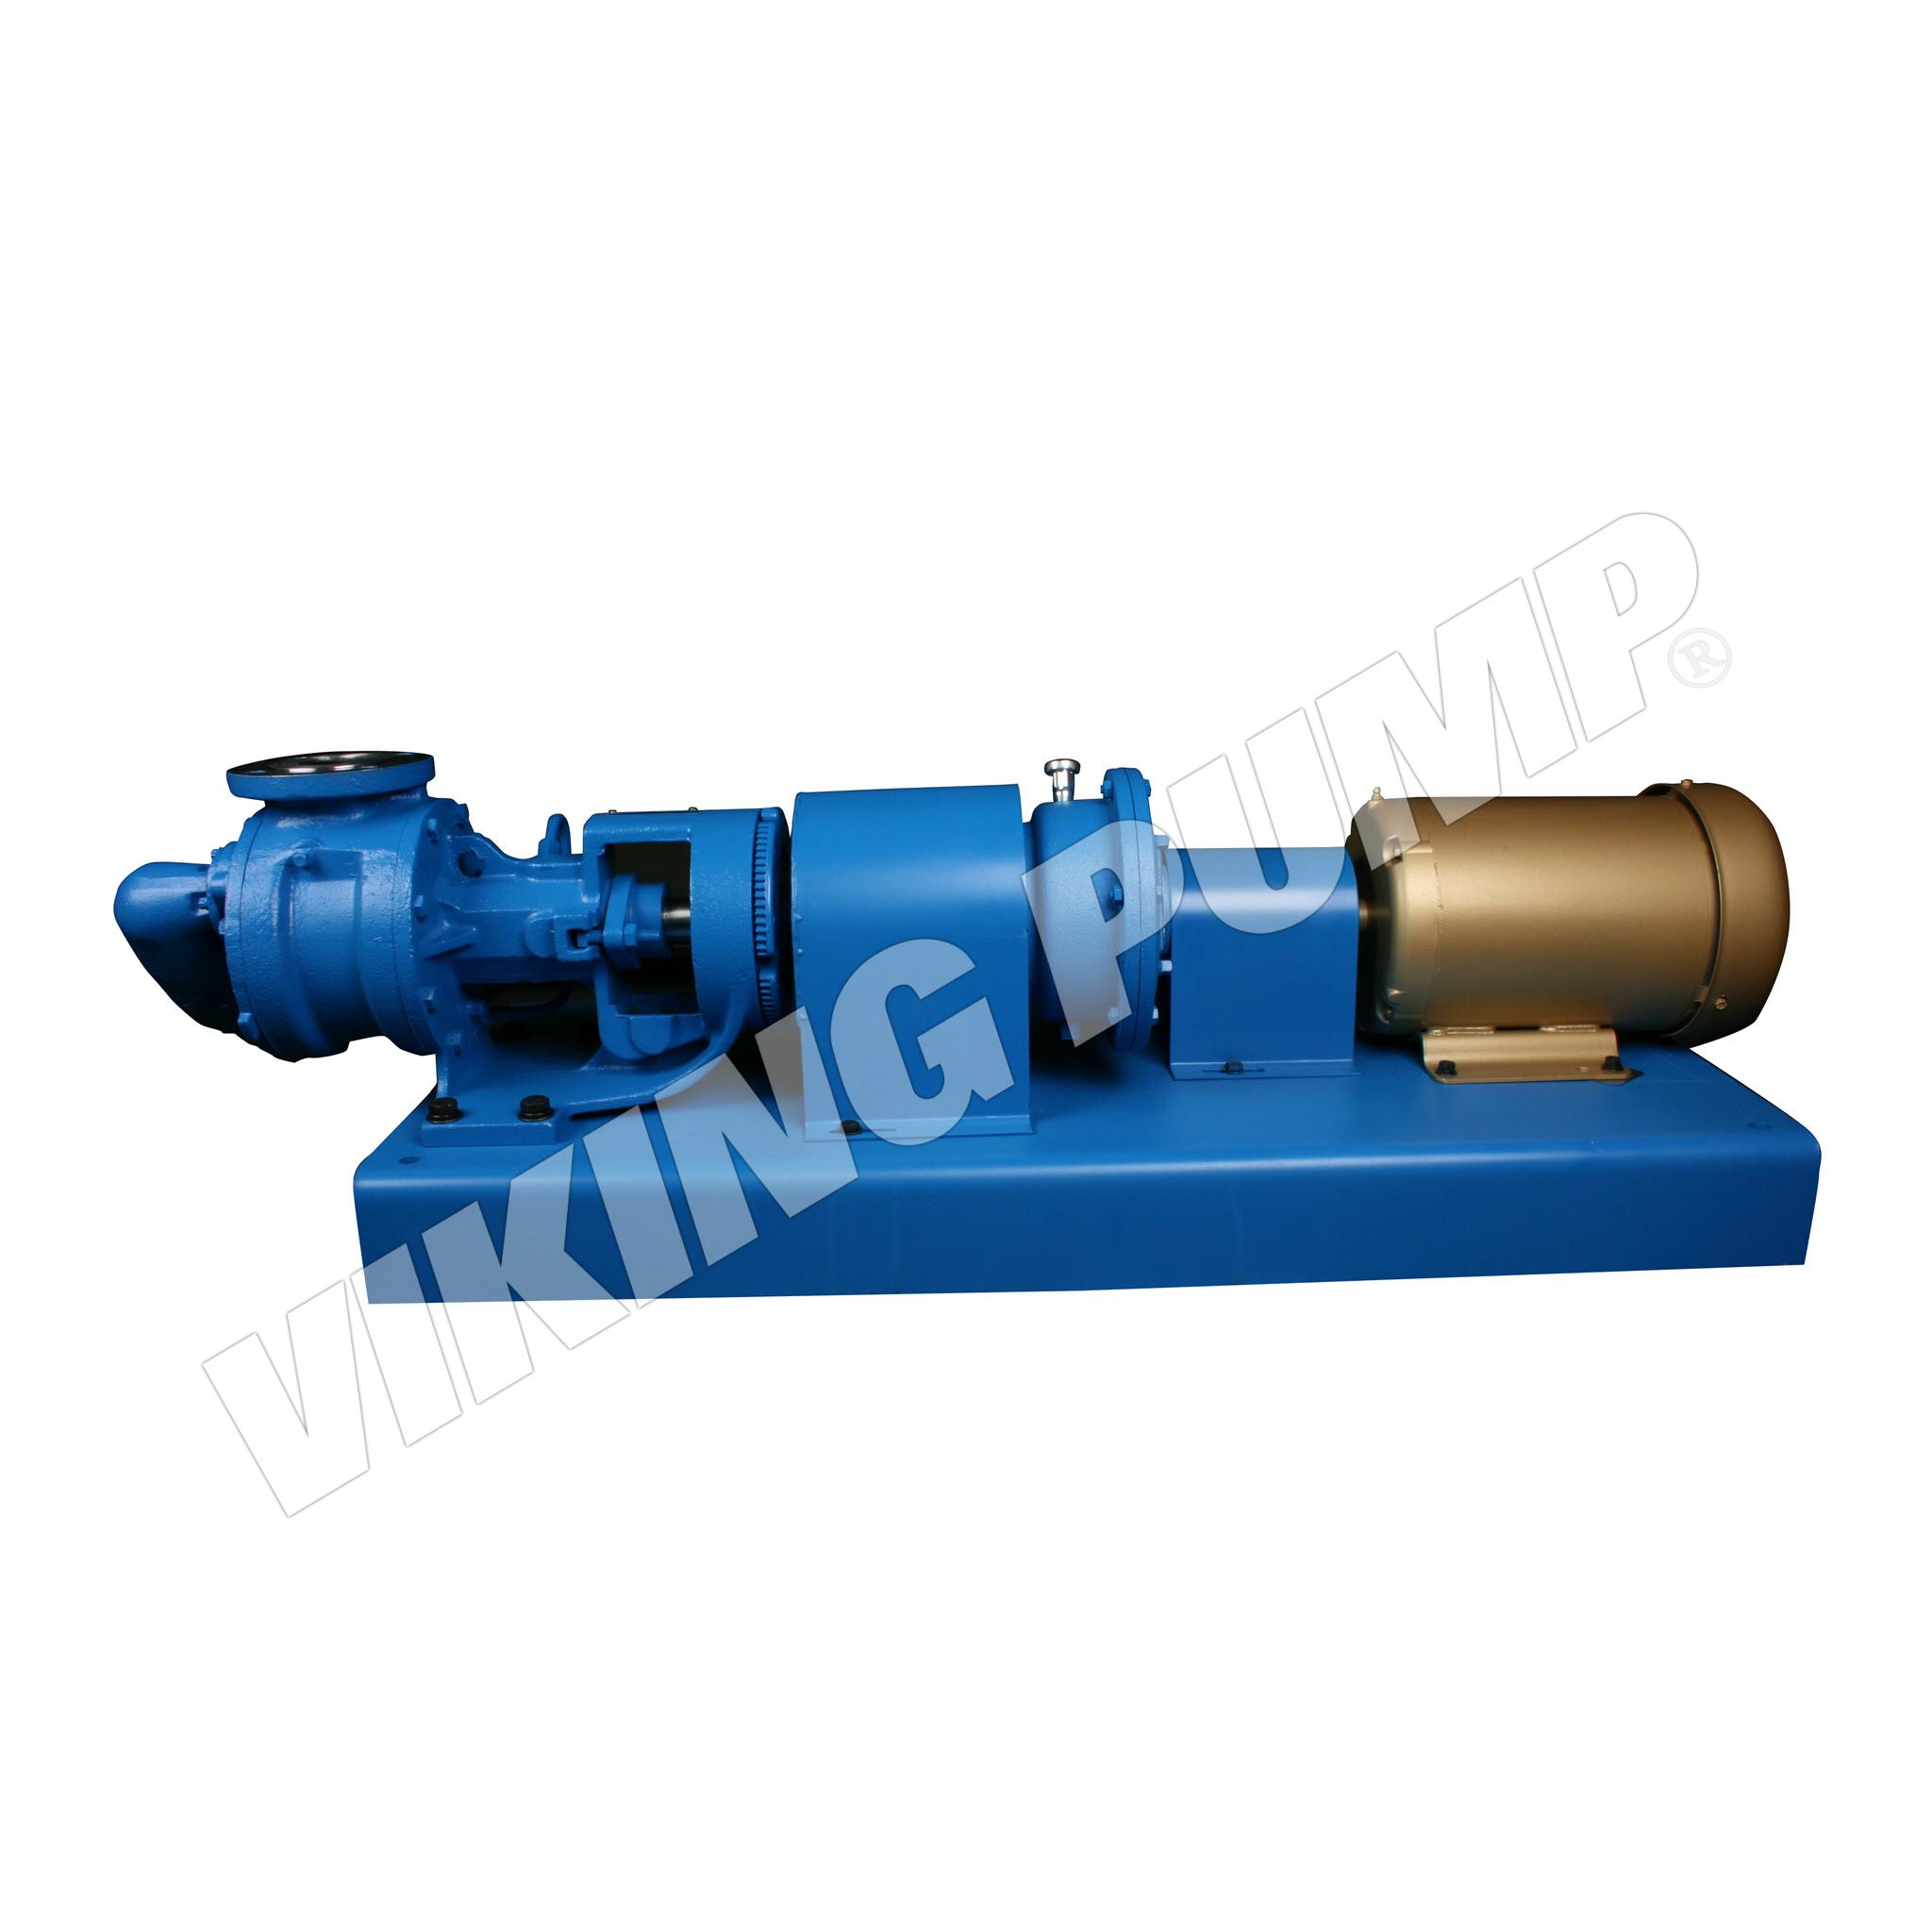 Model K4123A, Foot Mounted, Mechanical Seal, Relief Valve Pump with R Drive Unit